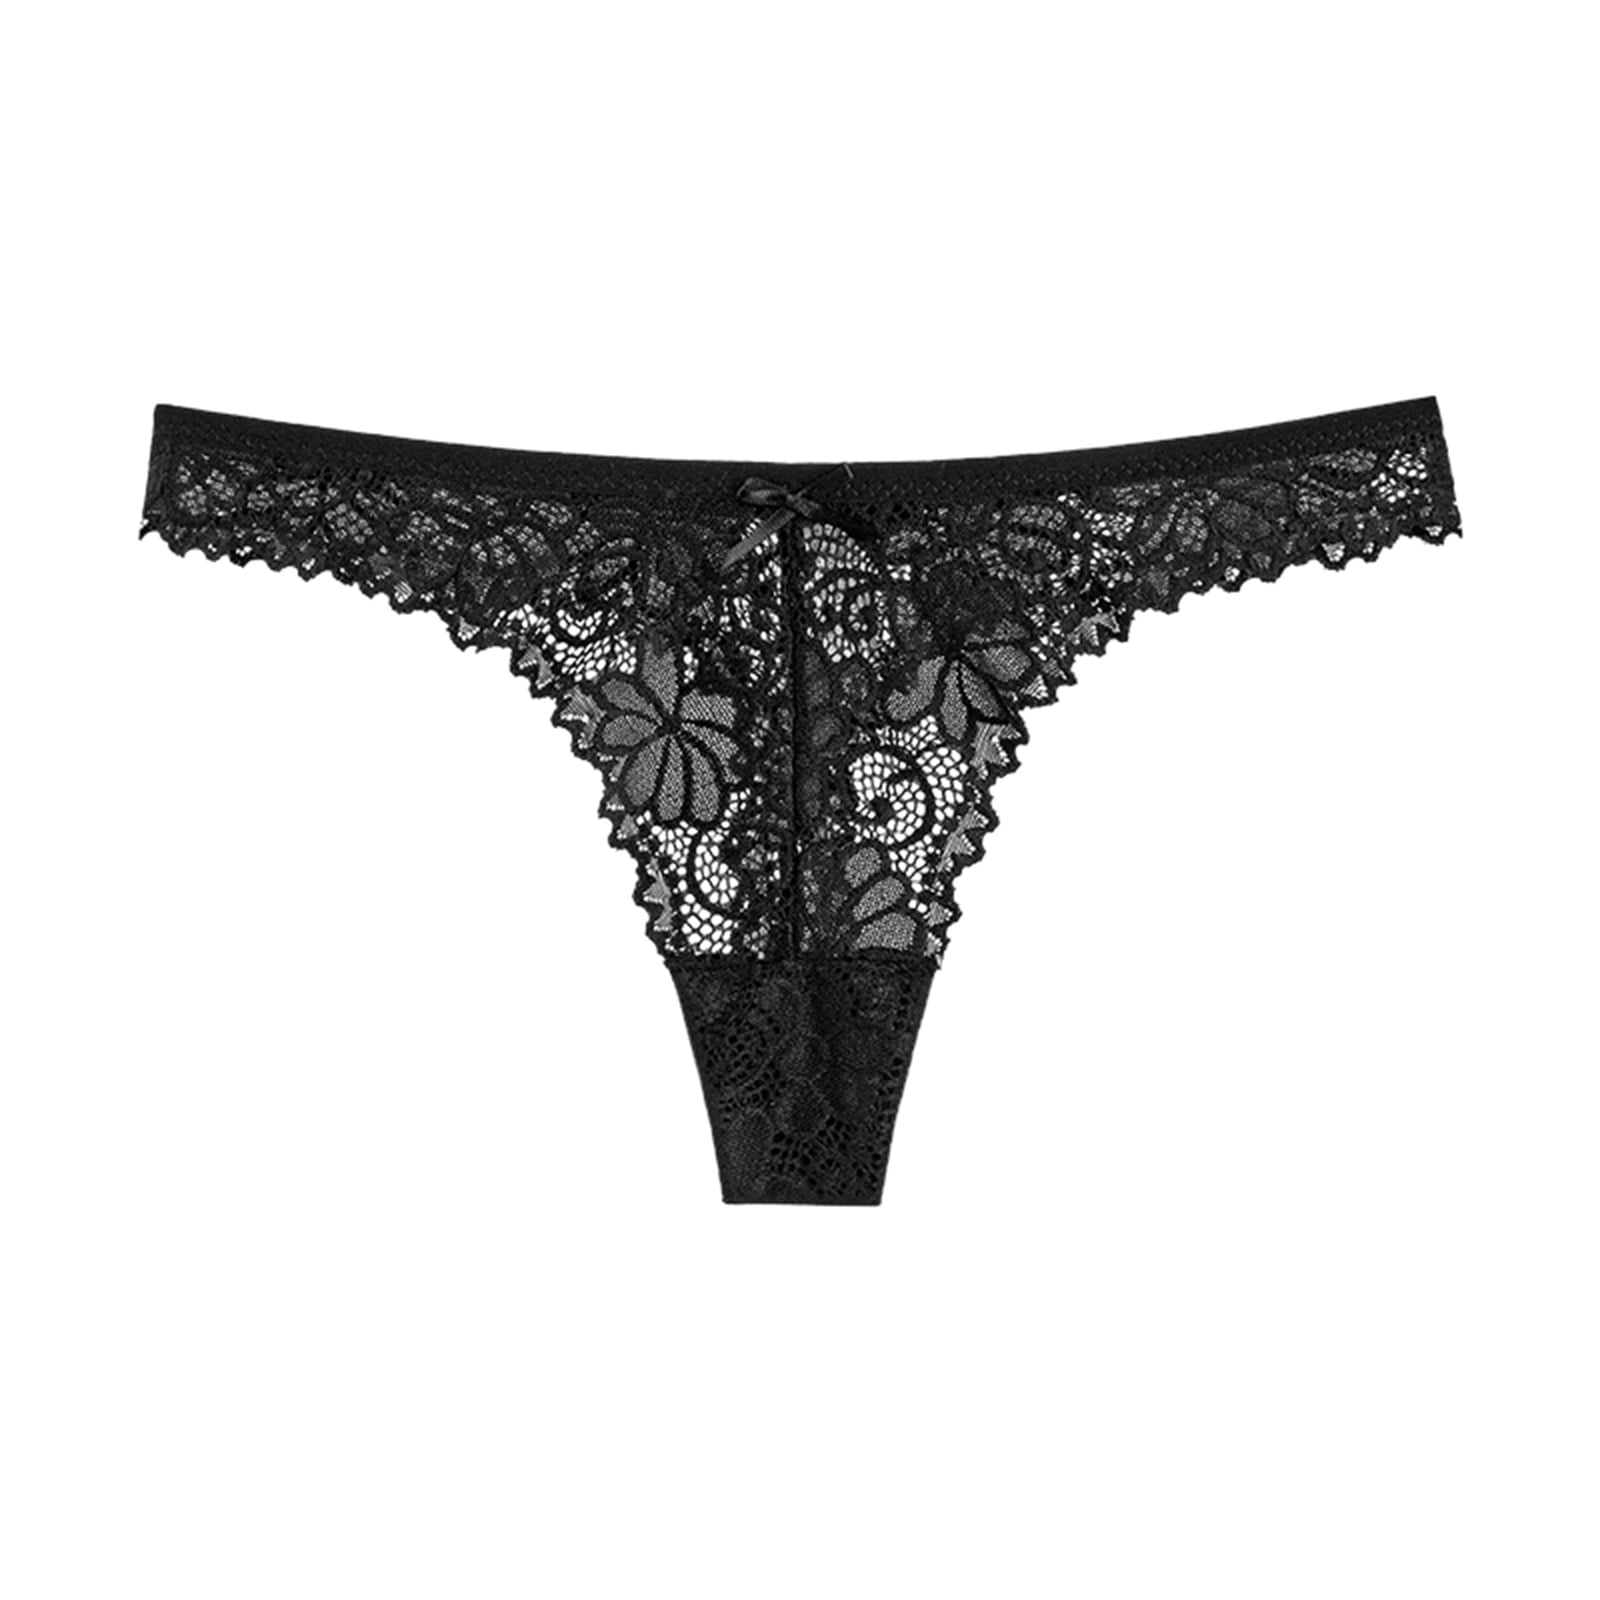 JDEFEG French Cut Underwear for Women Lace Underwear for Womens Cotton  Bikini Panties Soft Hipster Panty Ladies Briefs Pack Of Underwear for Women